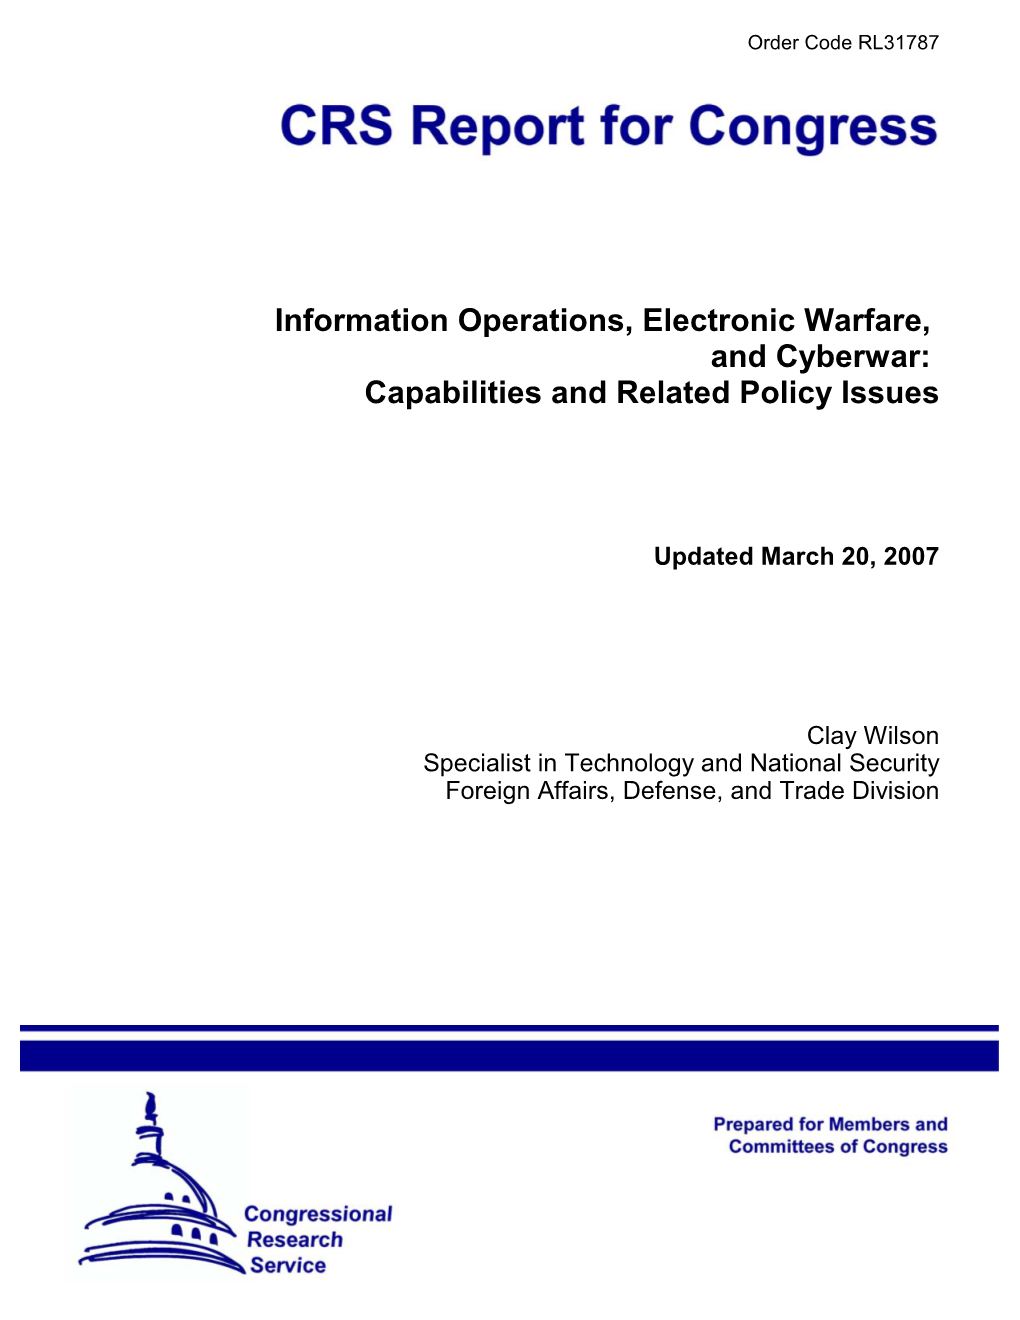 Information Operations, Electronic Warfare, and Cyberwar: Capabilities and Related Policy Issues